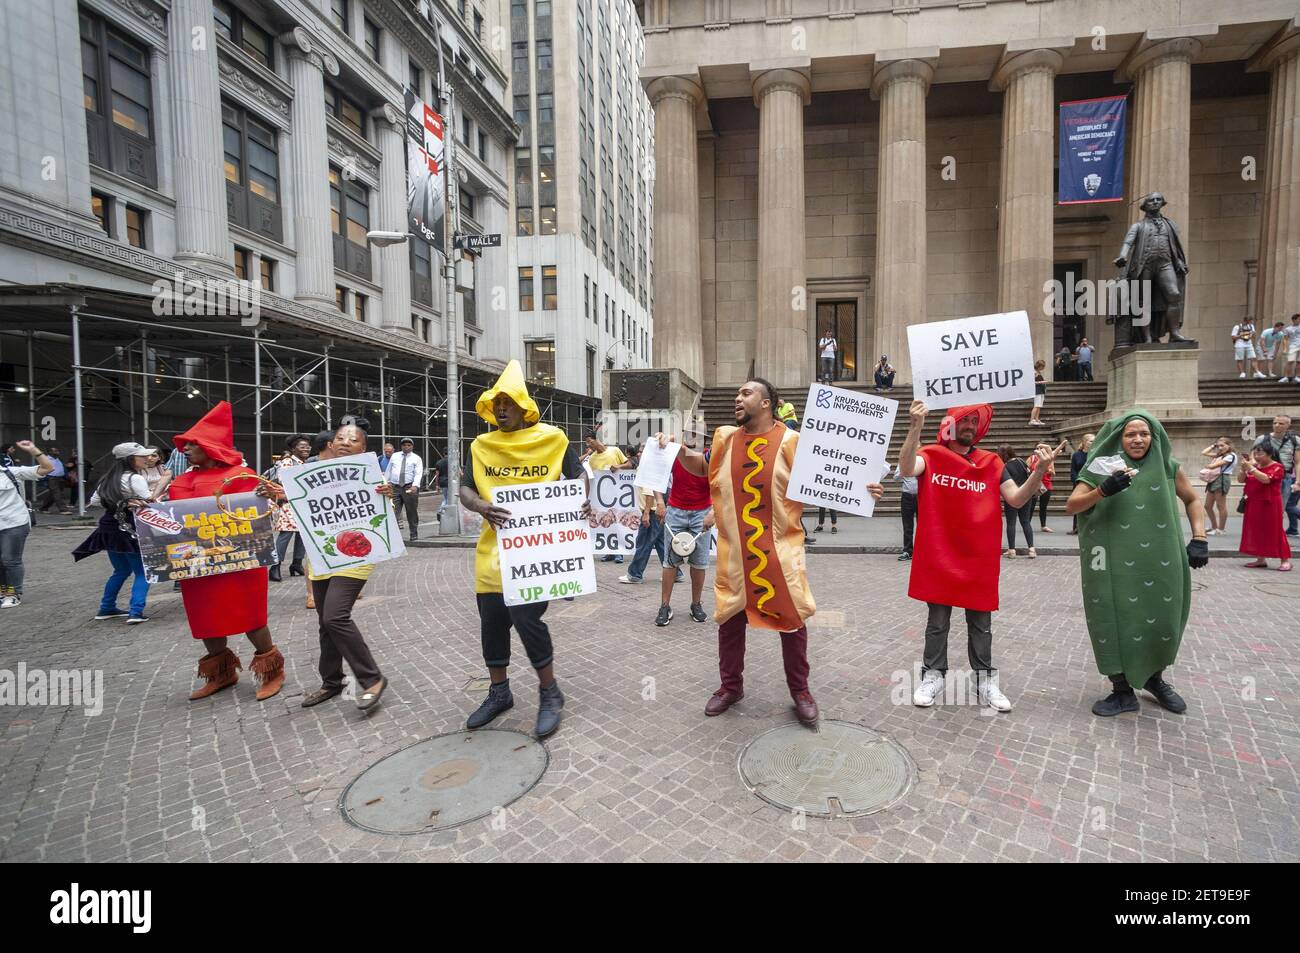 Protesters from Krupa Global Investments dressed as iconic ketchup and mustard bottles protest on Wednesday, September 12, 2018 the management of the Kraft Heinz Company by Berkshire Hathaway and 3G Capital, fearful that the investors are abandoning the company. (Photo by Richard B. Levine) Stock Photo